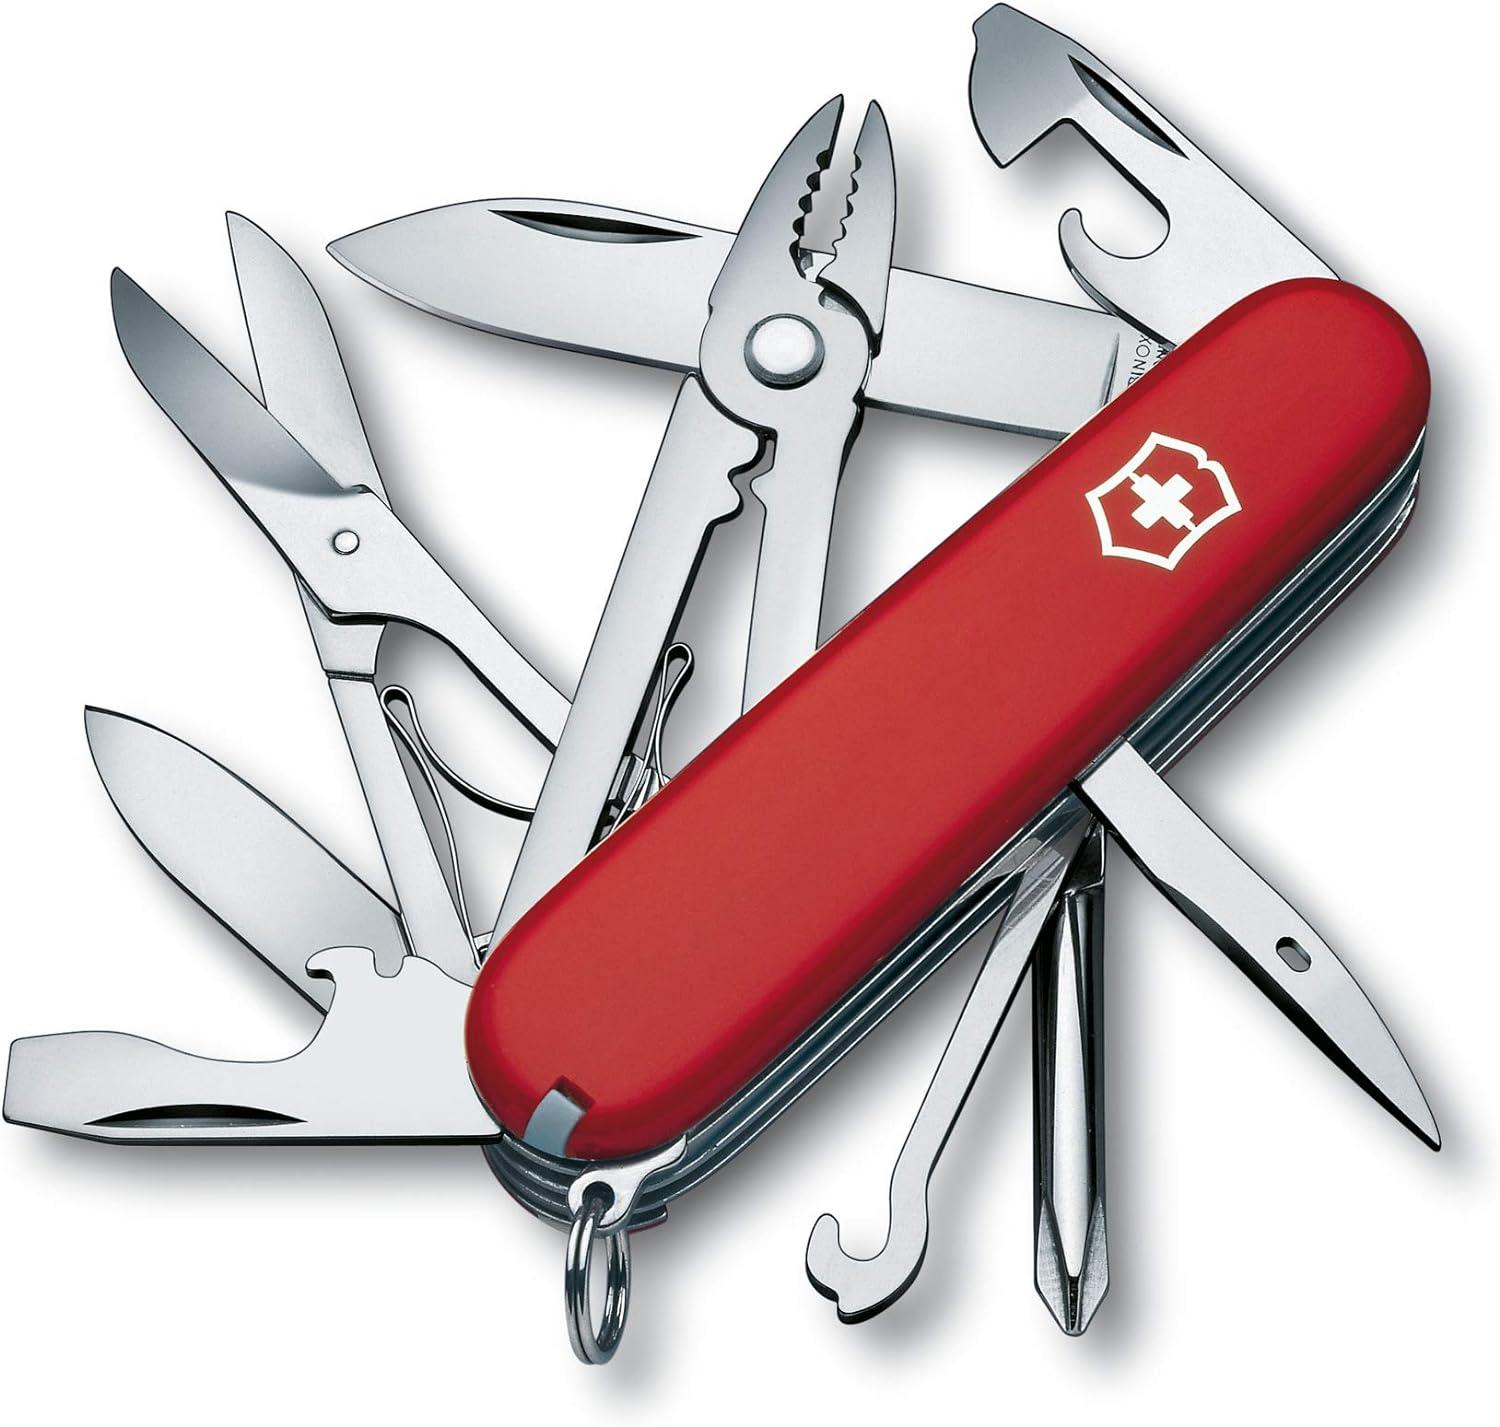 Victorinox Swiss Army Multi-Tool Tinker Pocket Knife for $41.06 Shipped